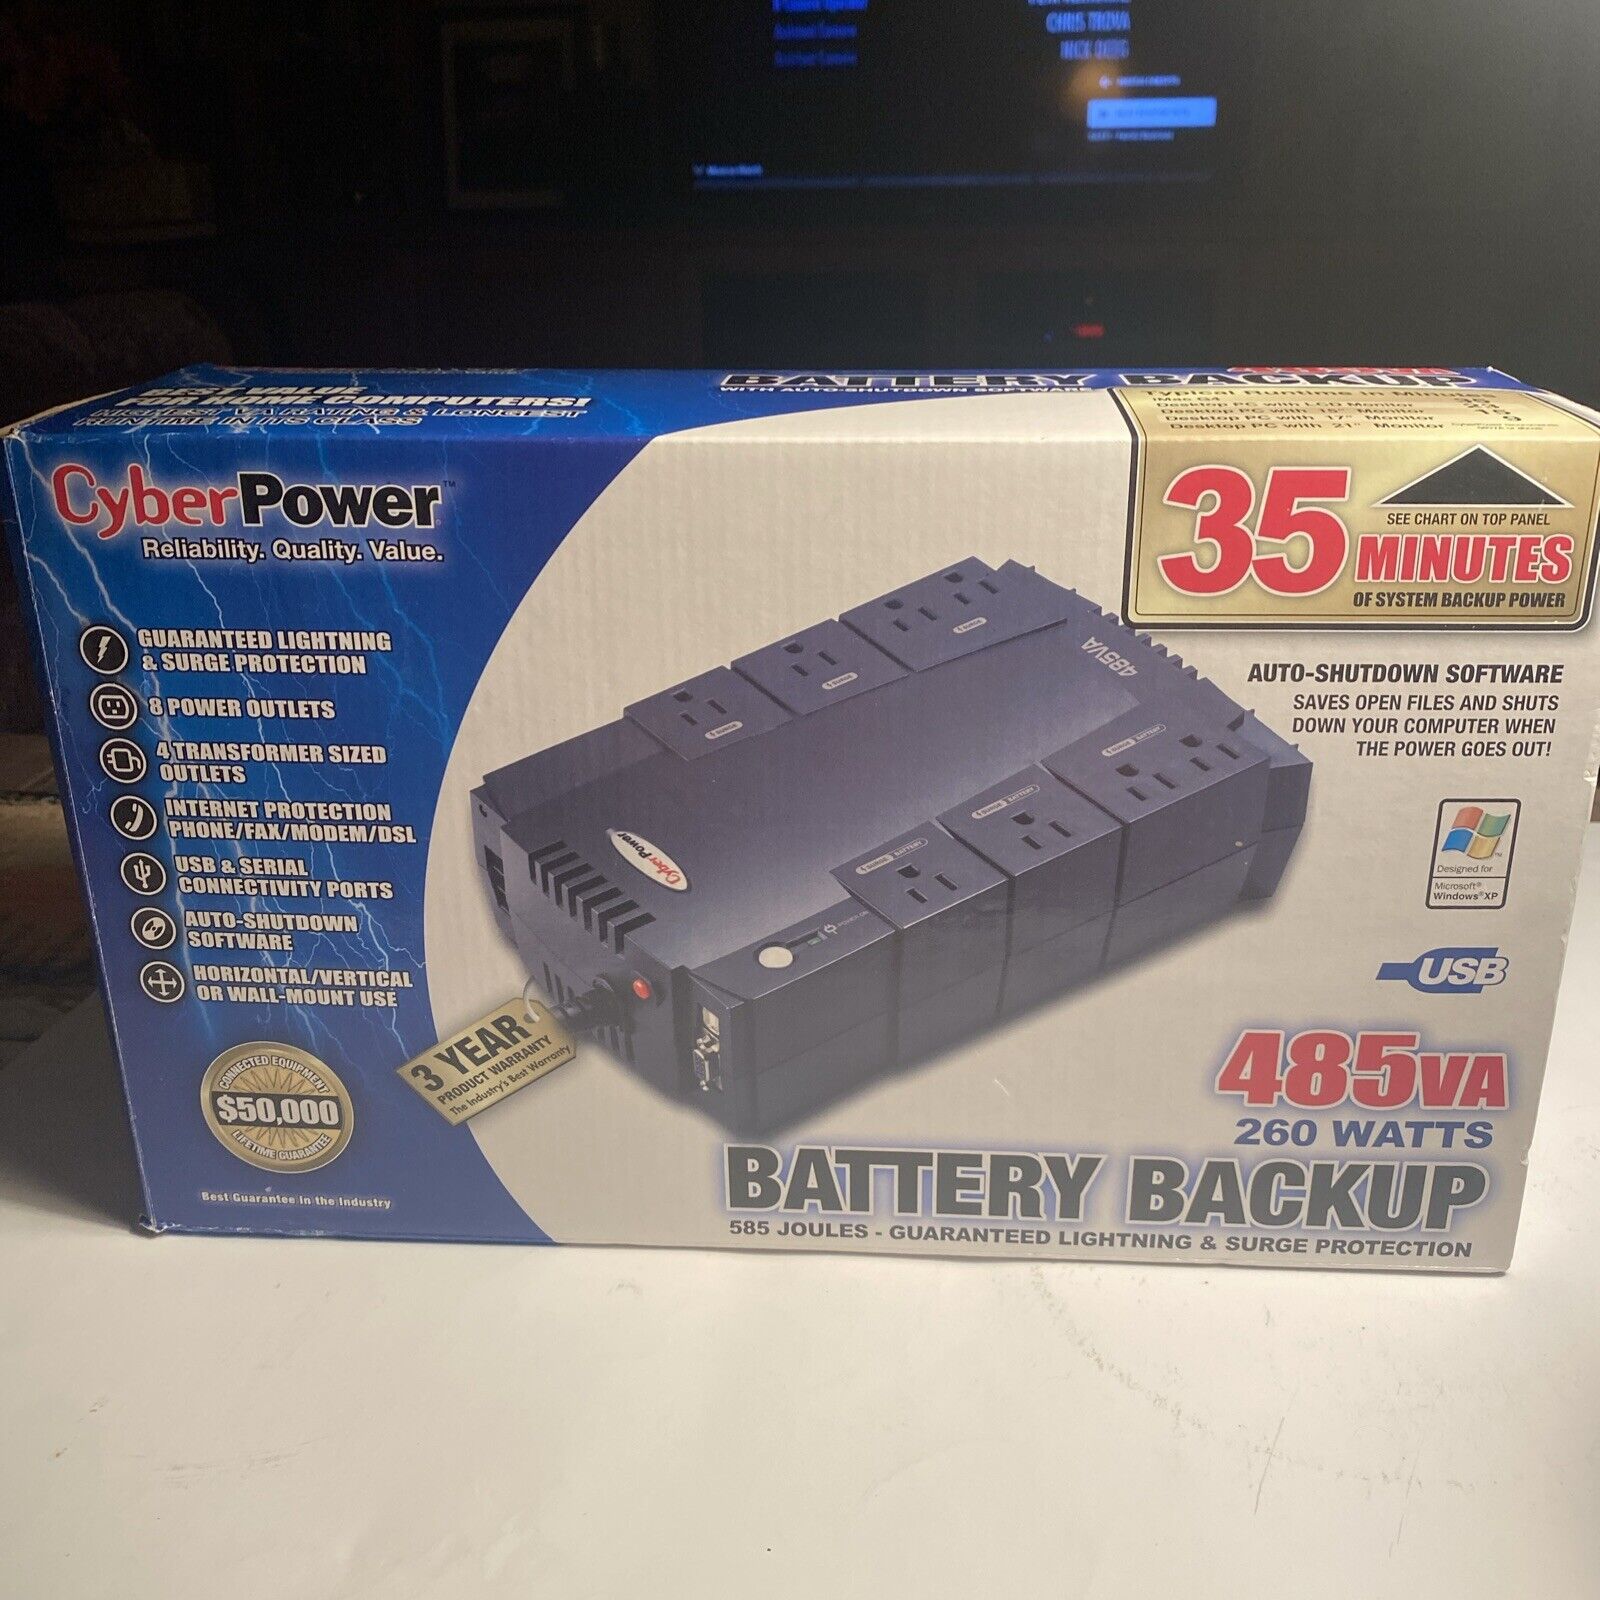 CyberPower 8-Outlet 485VA 260 watts.  PC Battery Backup Black.  NIB (see Photos)